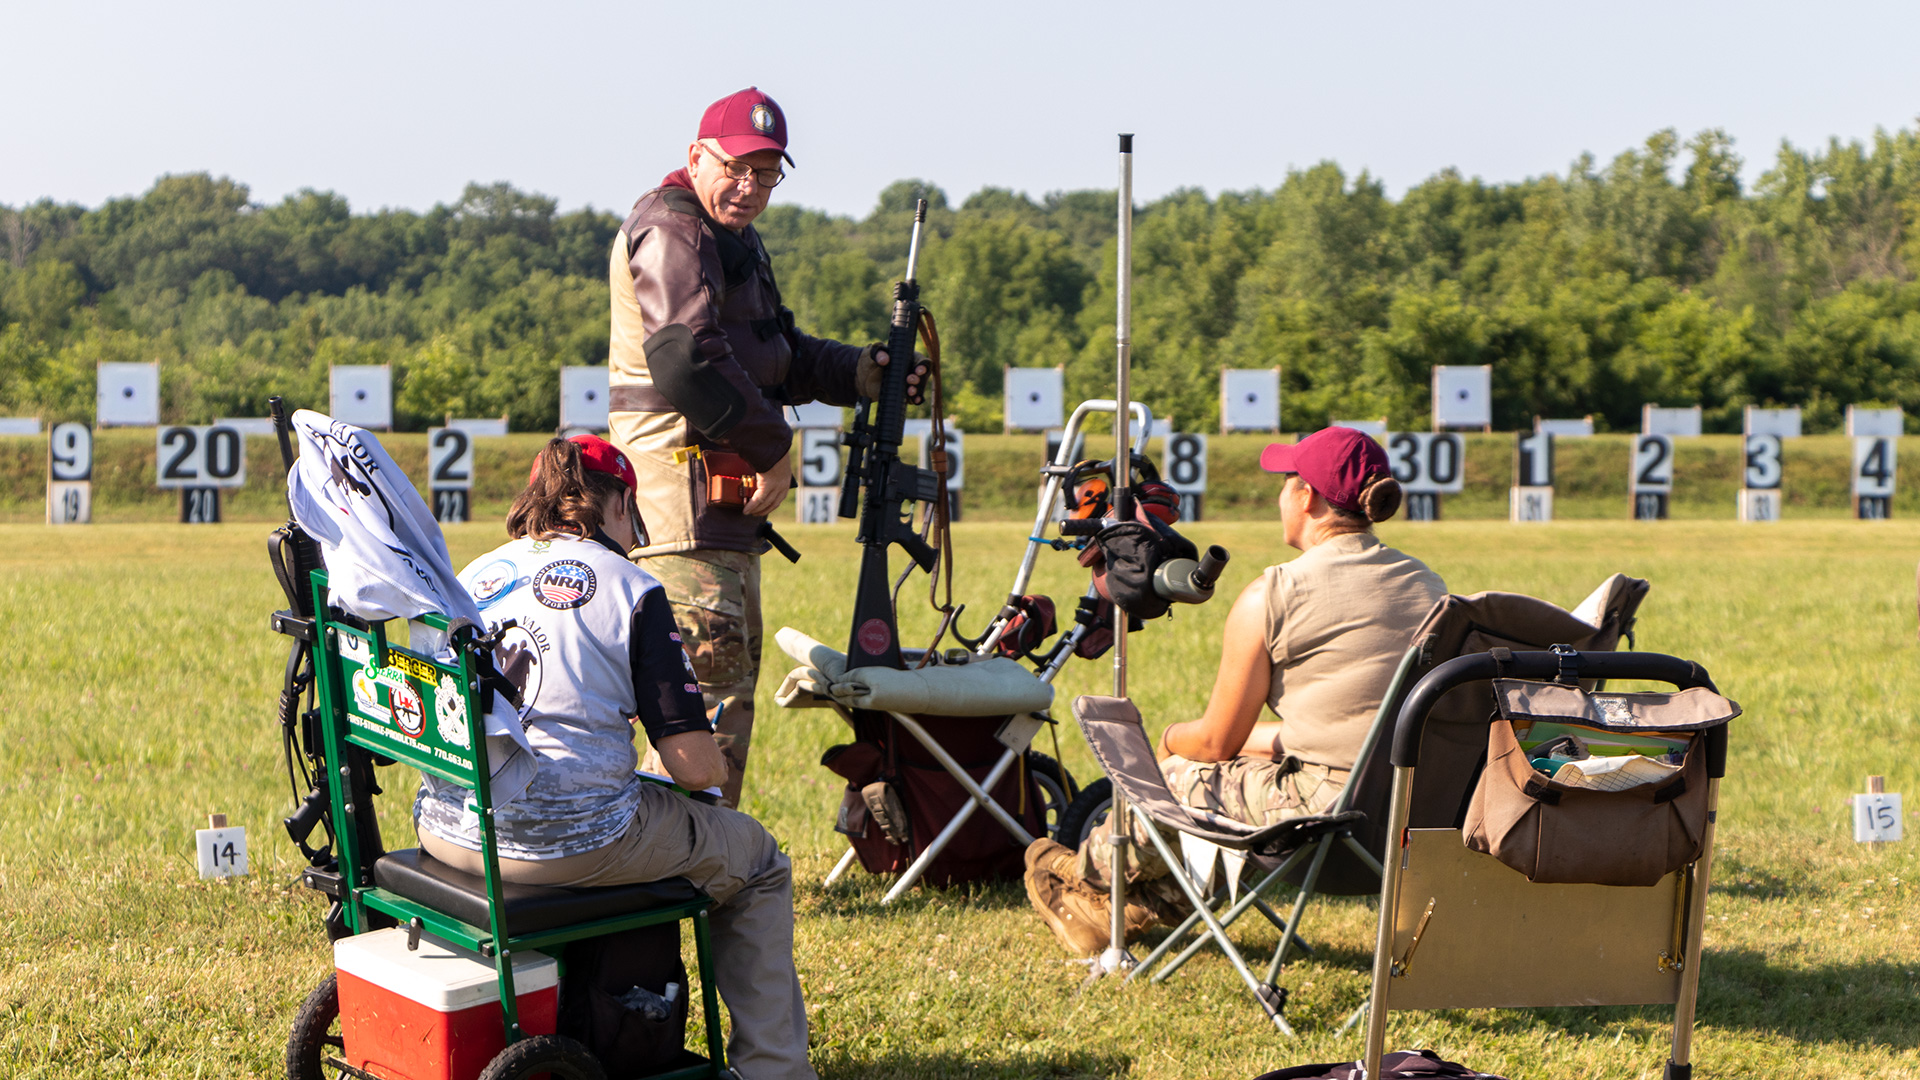 NRA High Power Rifle competitors